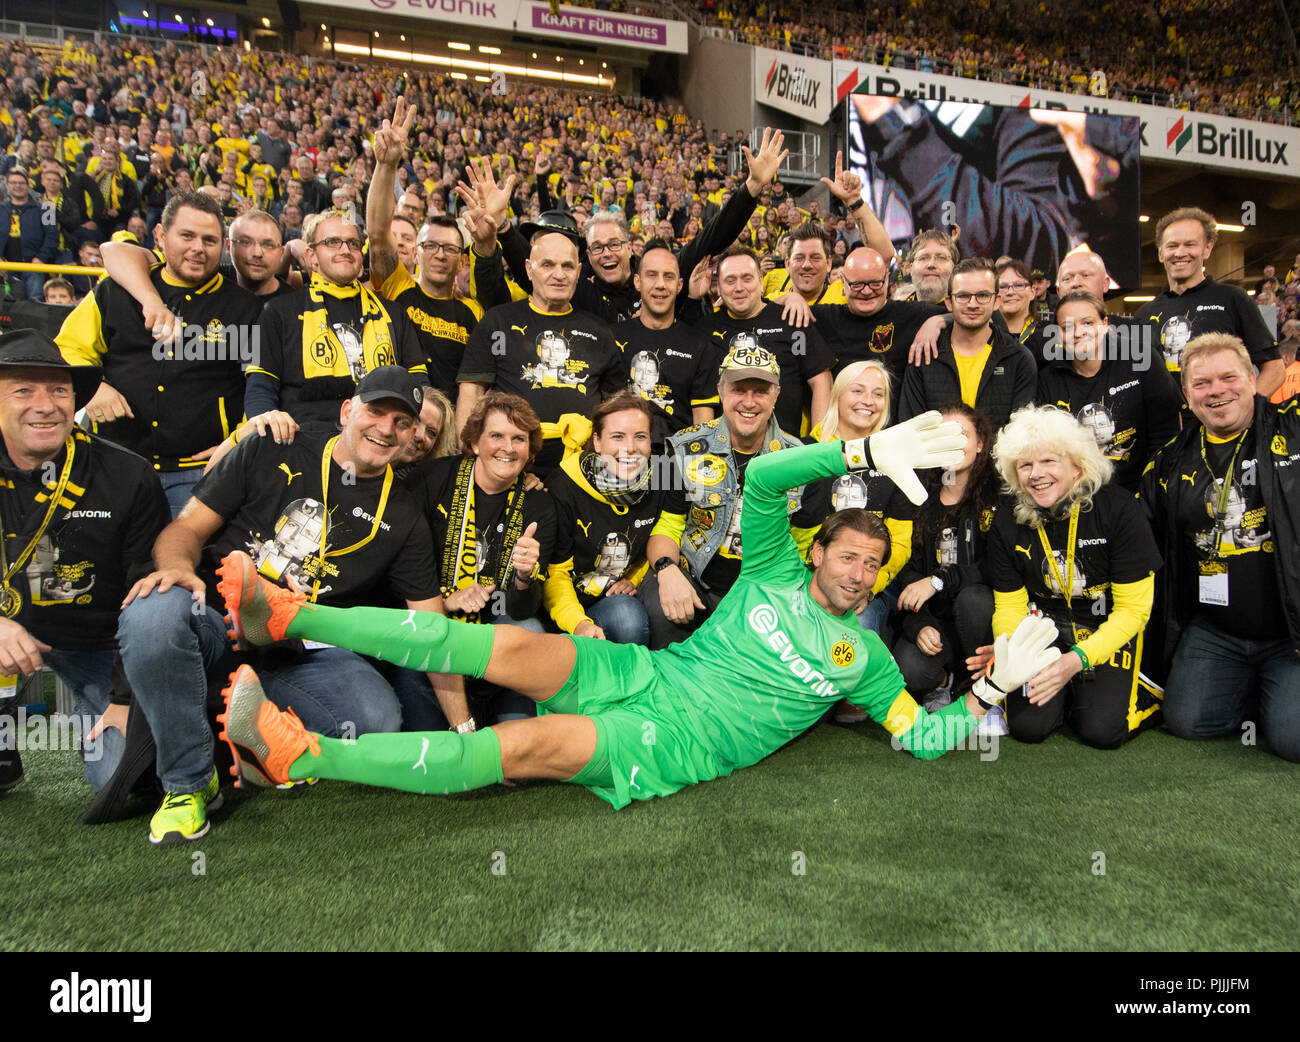 Dortmund, Germany. 07th Sep, 2018. Soccer: Farewell game by Roman Weidenfeller. Roman Weidenfeller poses in the halftime with the flag bearers of the BVB fans. Credit: Bernd Thissen/dpa/Alamy Live News Stock Photo